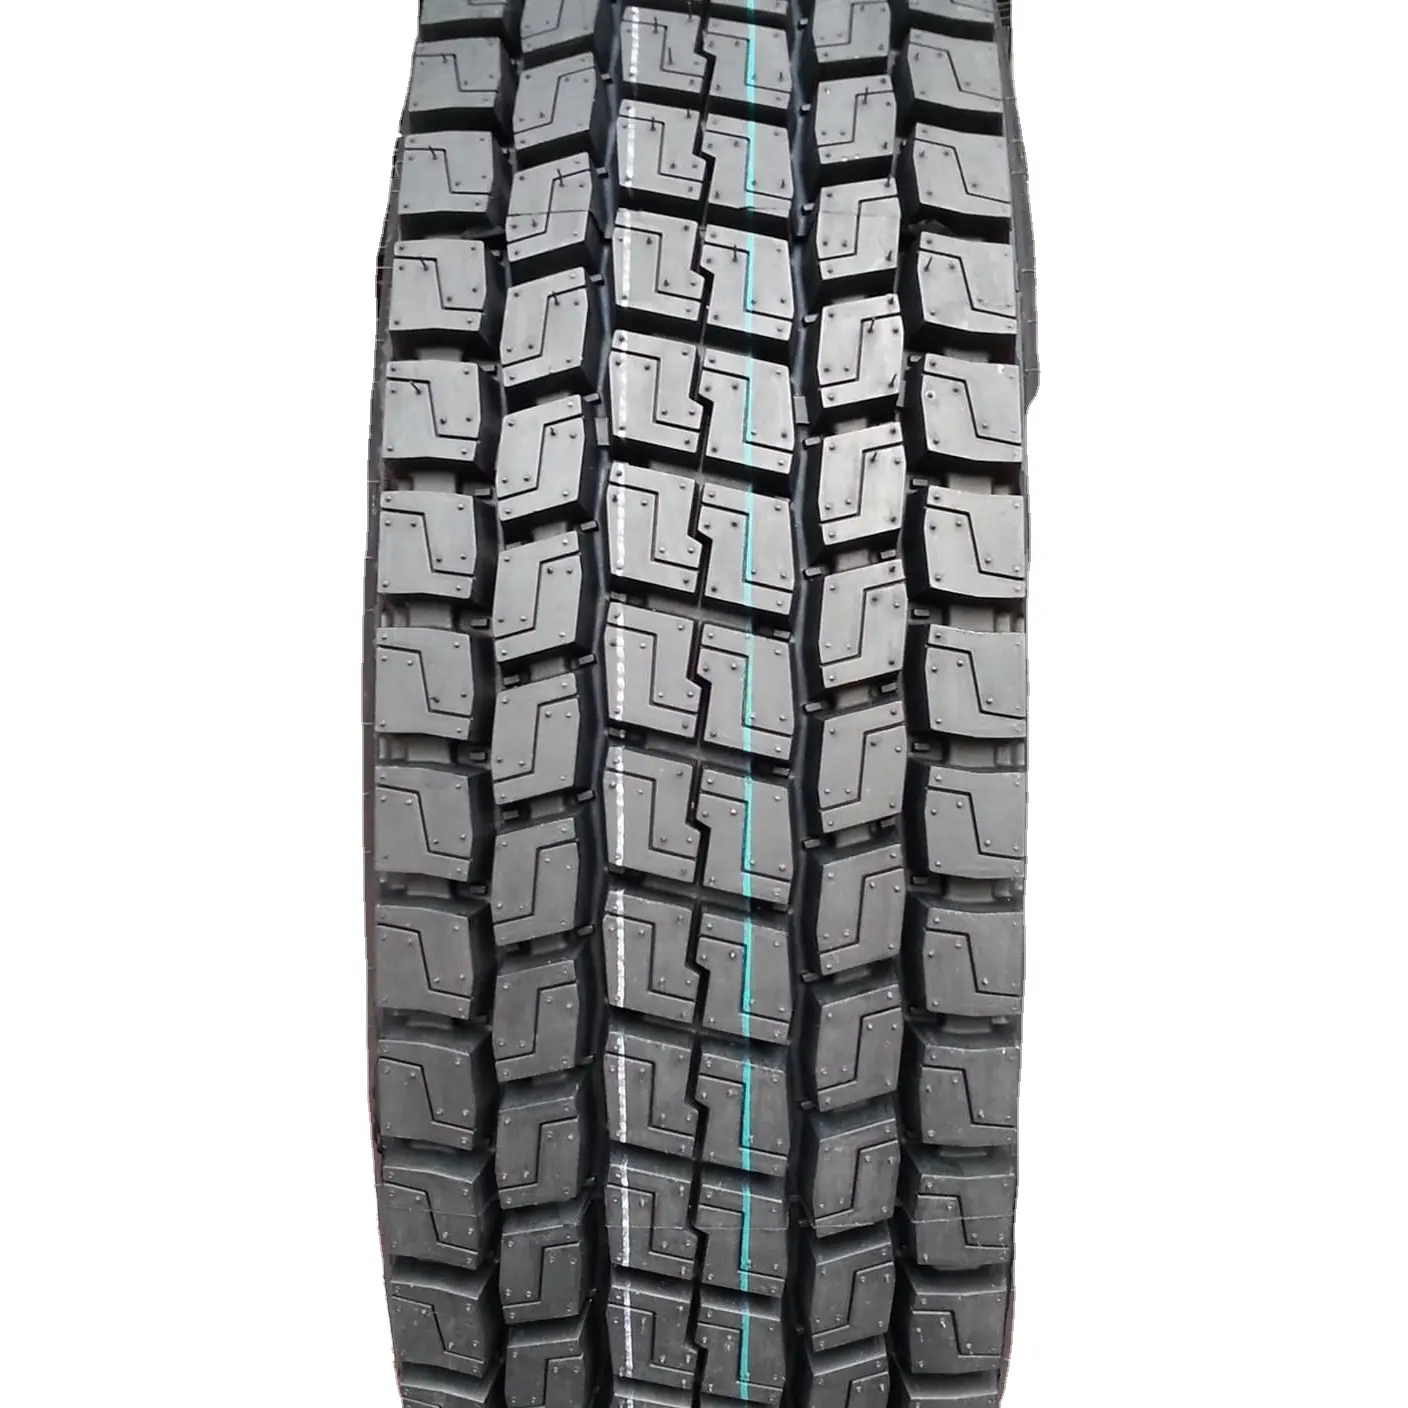 China Tire Manufacturer GM ROVER Truck Tire 12 R 22.5 295 80 R22.5 315/80 R22.5 with 100 000.0 kms Warranty